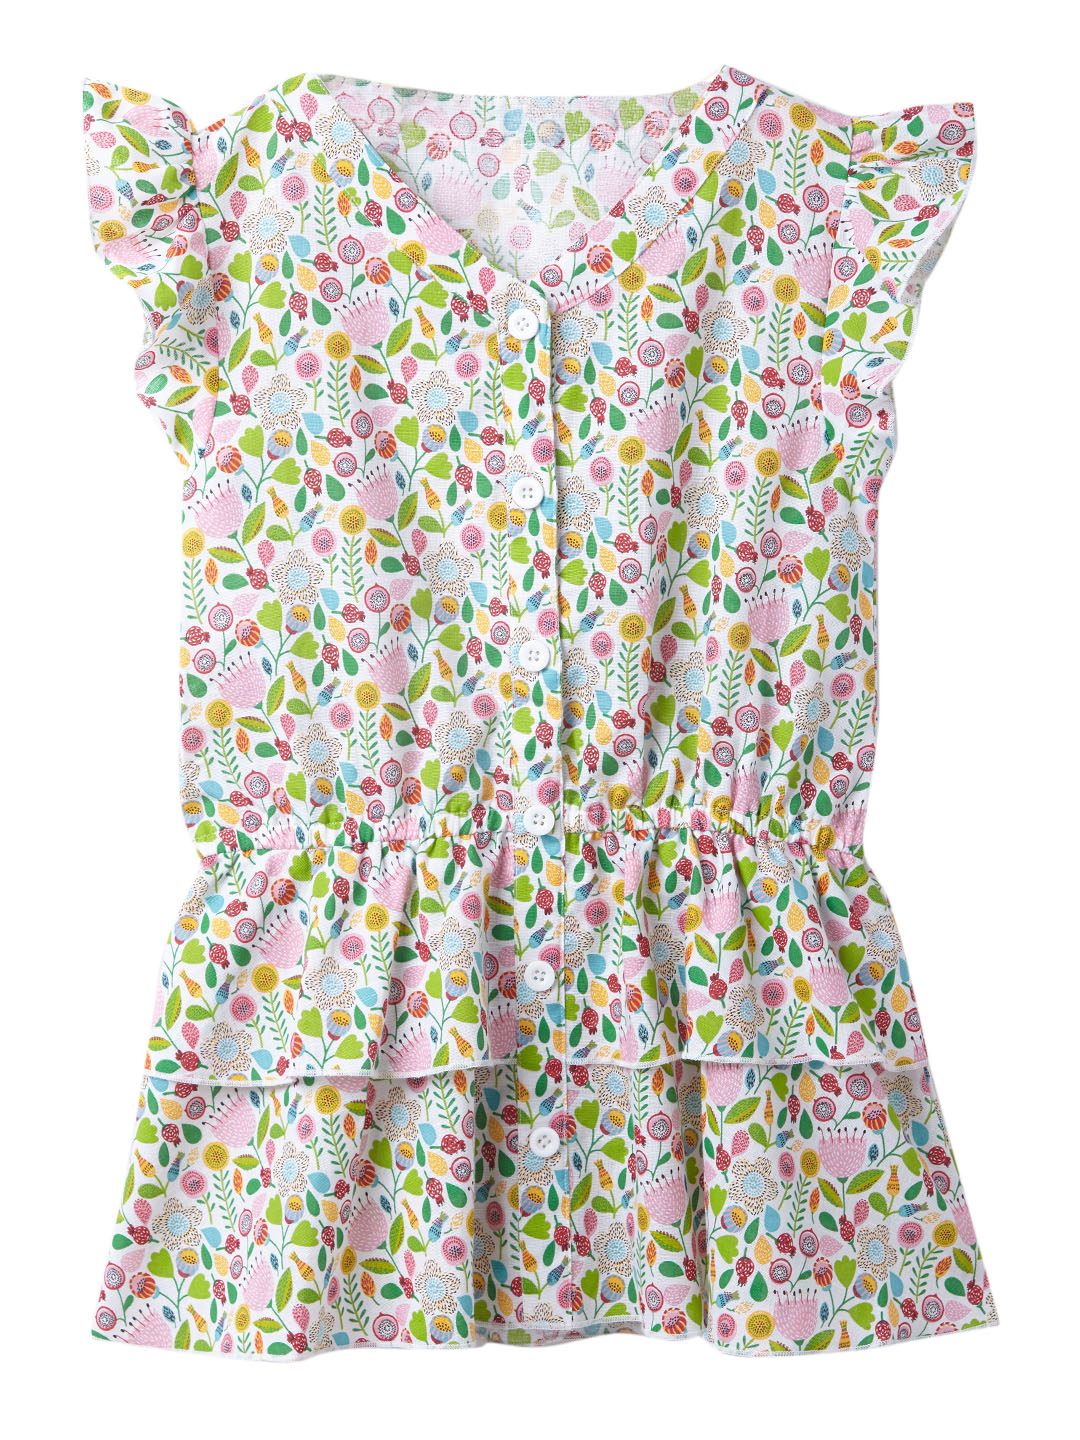 Multicolor Printed Fashion Woven Top for Girls Age 4 to 12 Years